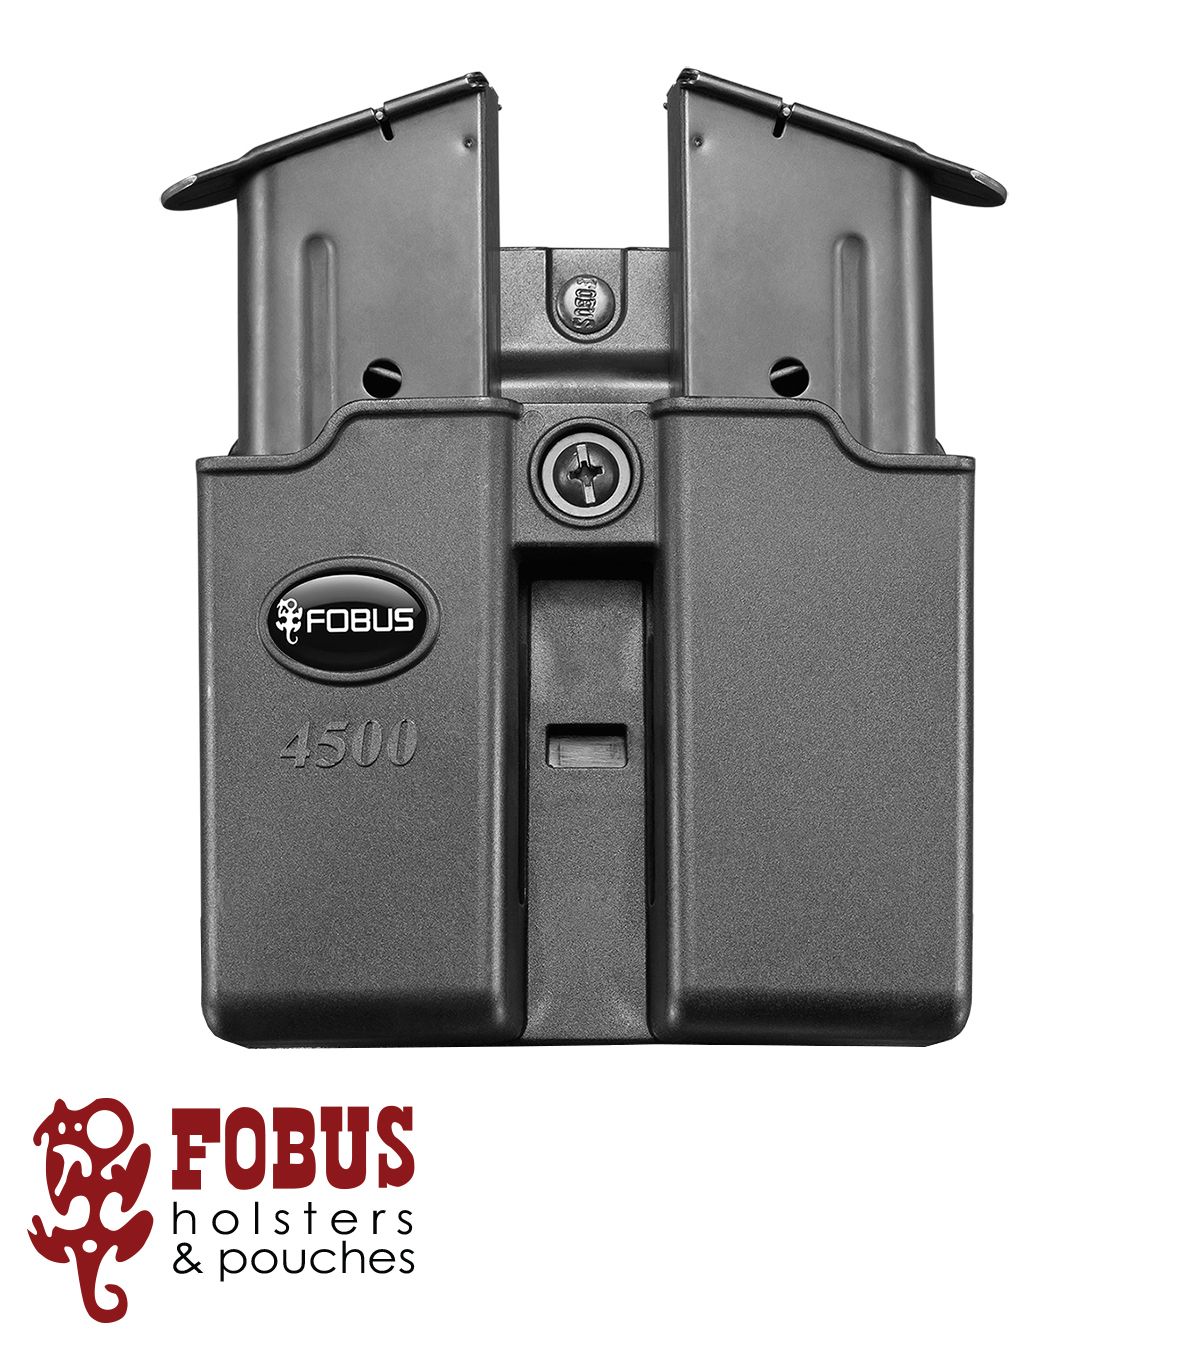 Fobus 4500p Paddle Double Magazine Pouch Single Stack 1911 Iai4500p for sale online